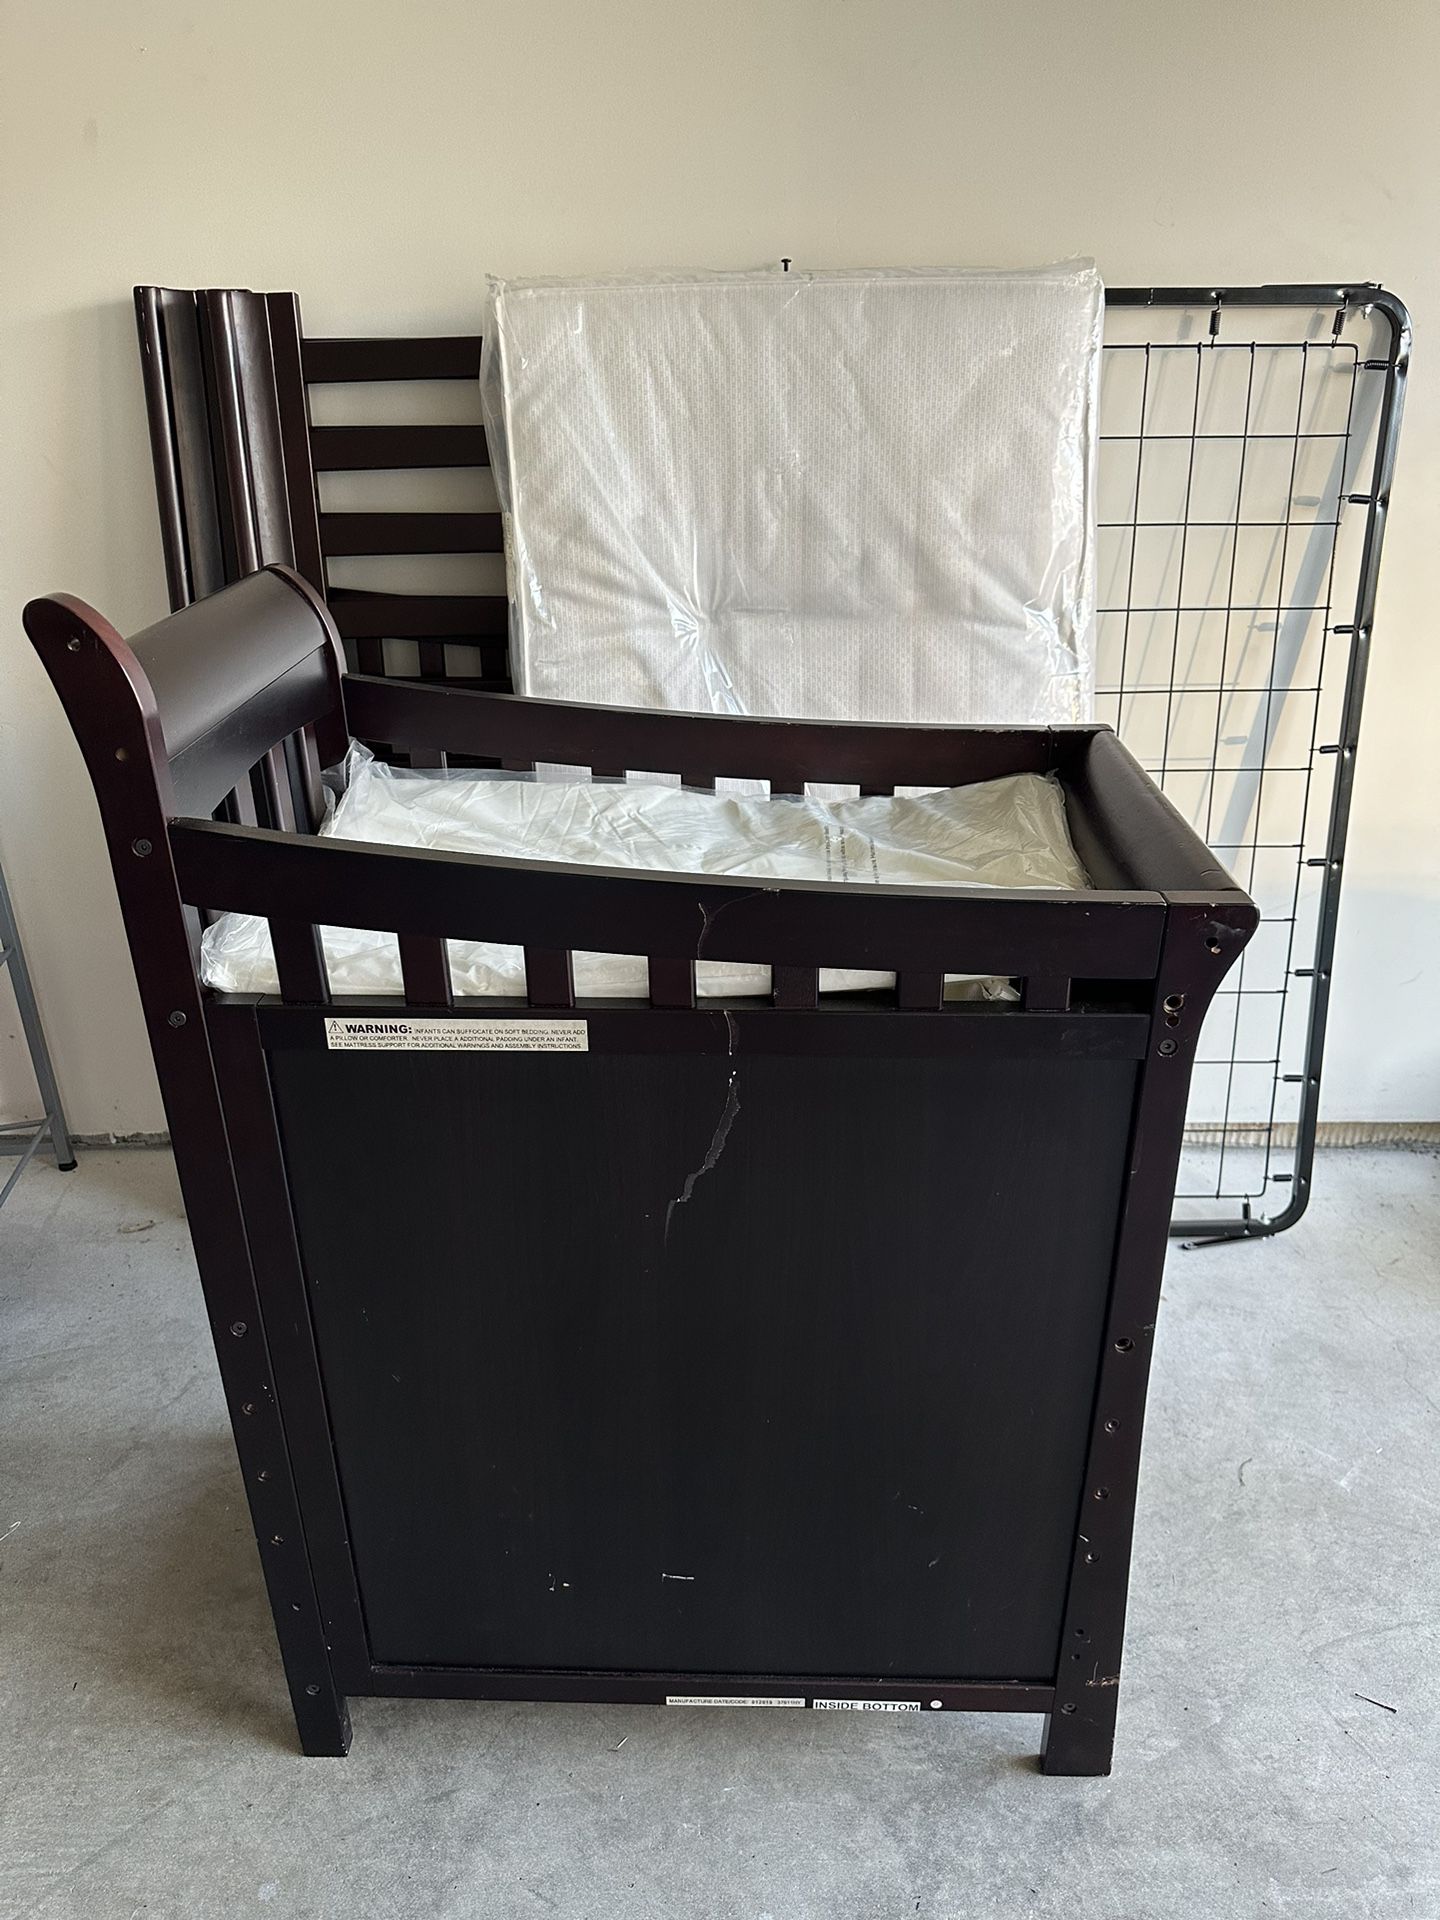 Crib With Diaper Changing Area